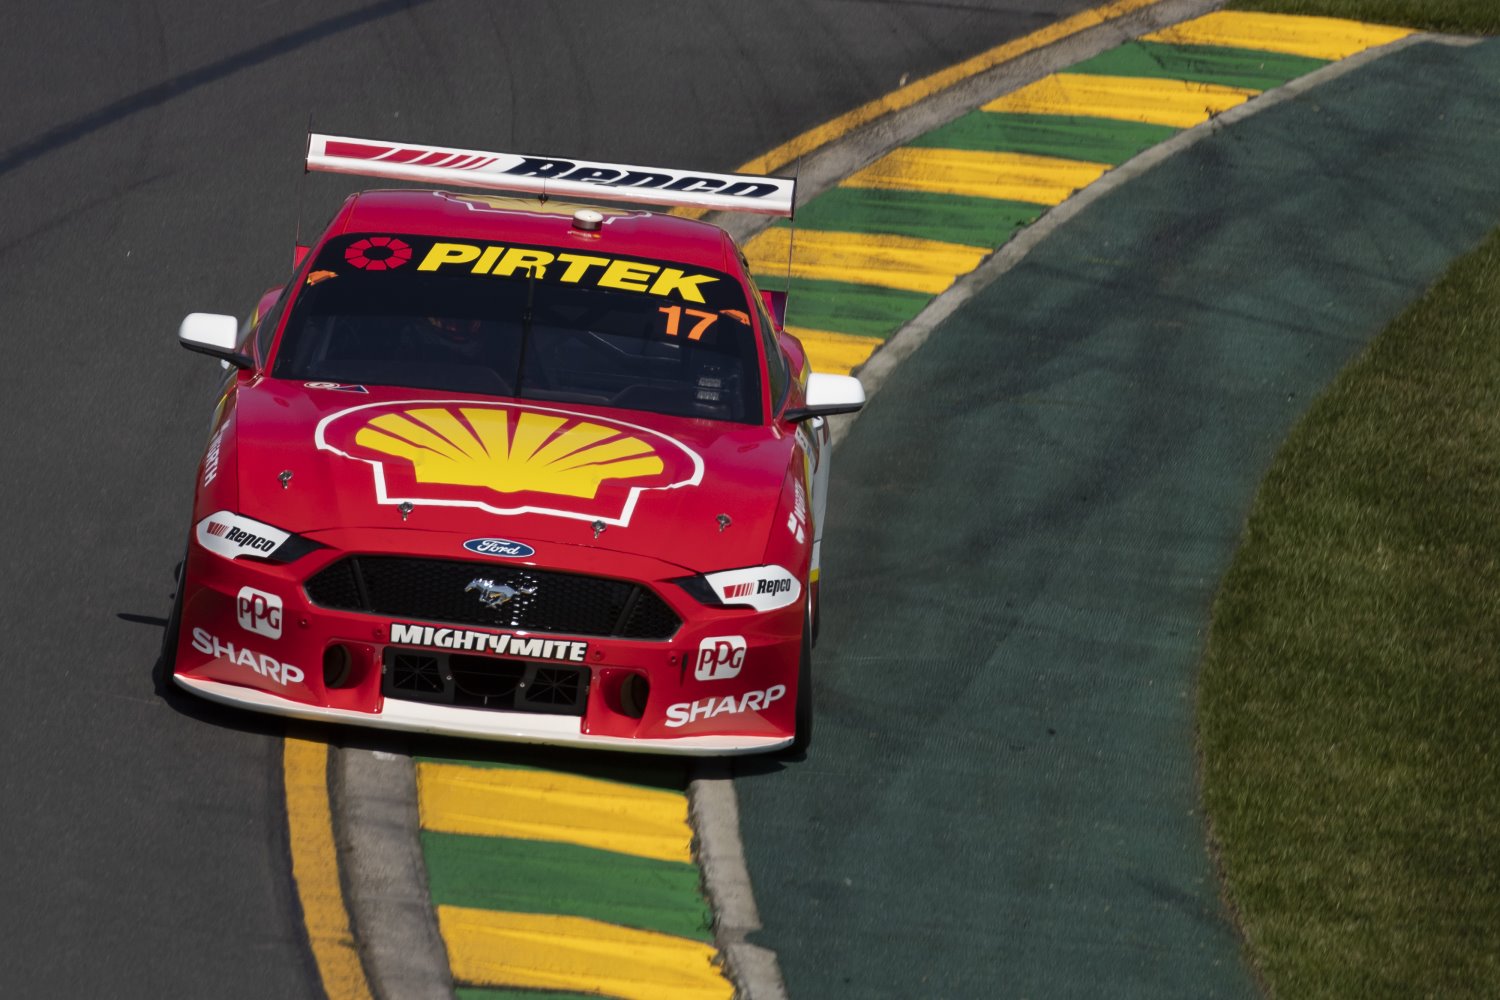 Double pole for McLaughlin. Since Penske people are tweaking the team's engines they are quick